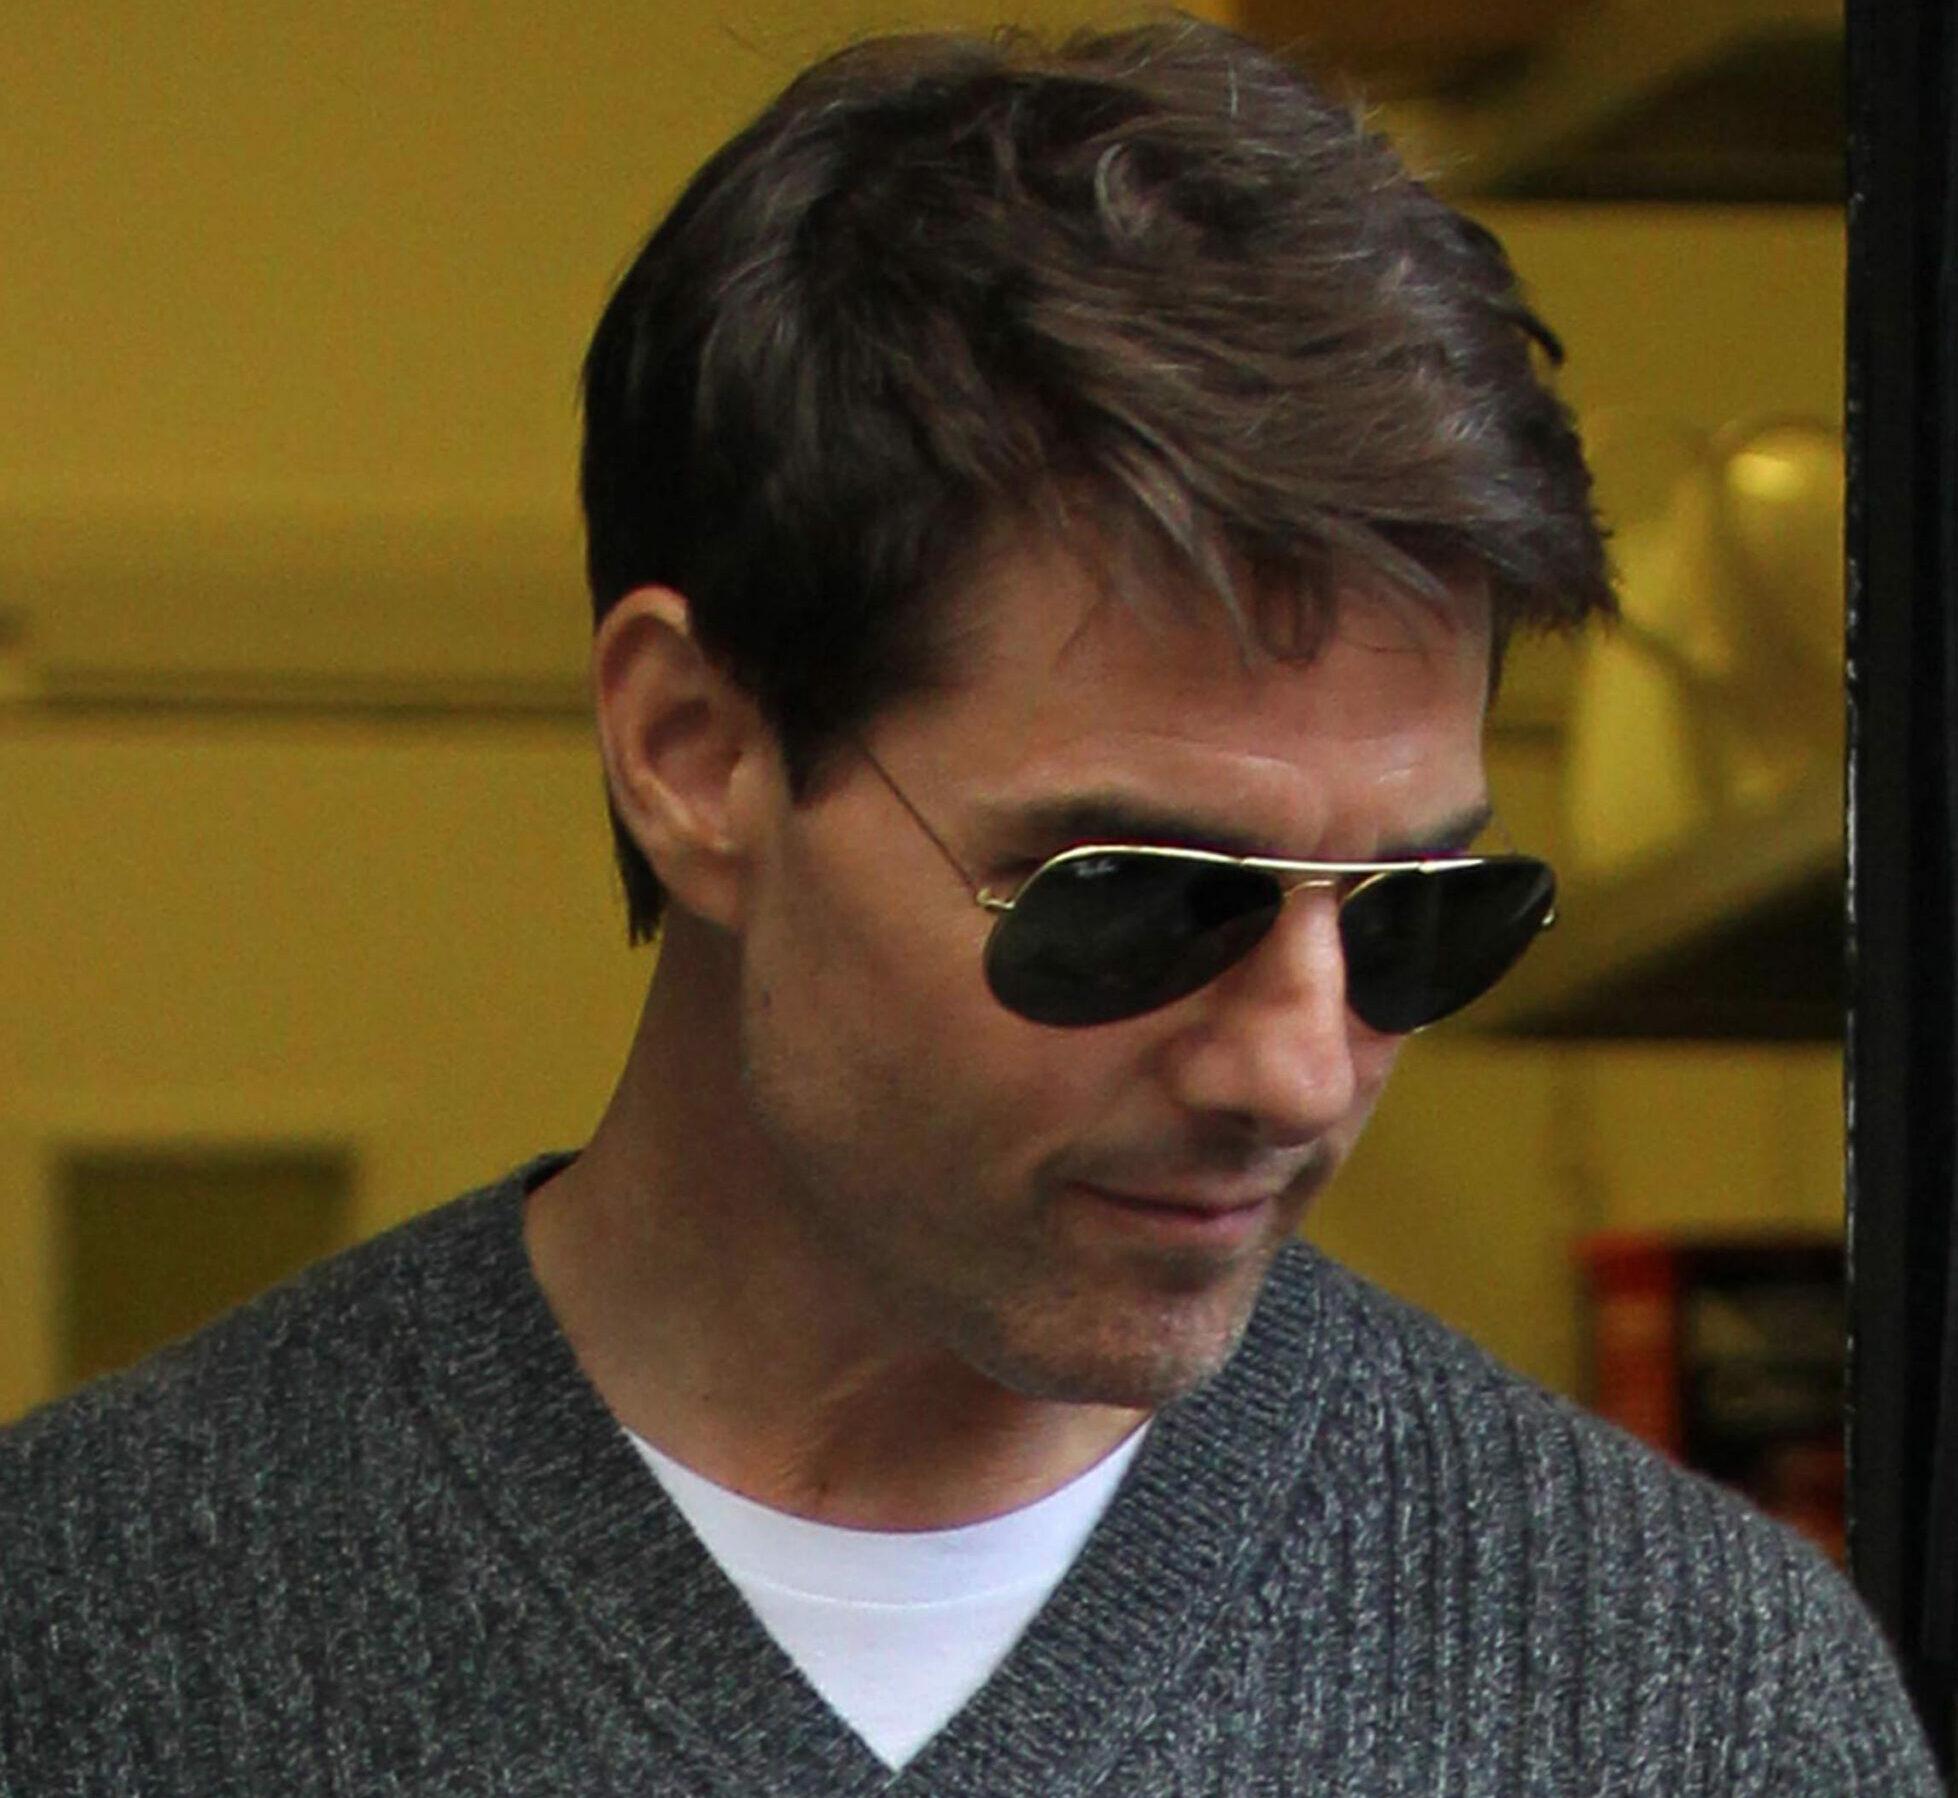 Tom Cruise is seen leaving an office building in Holborn.